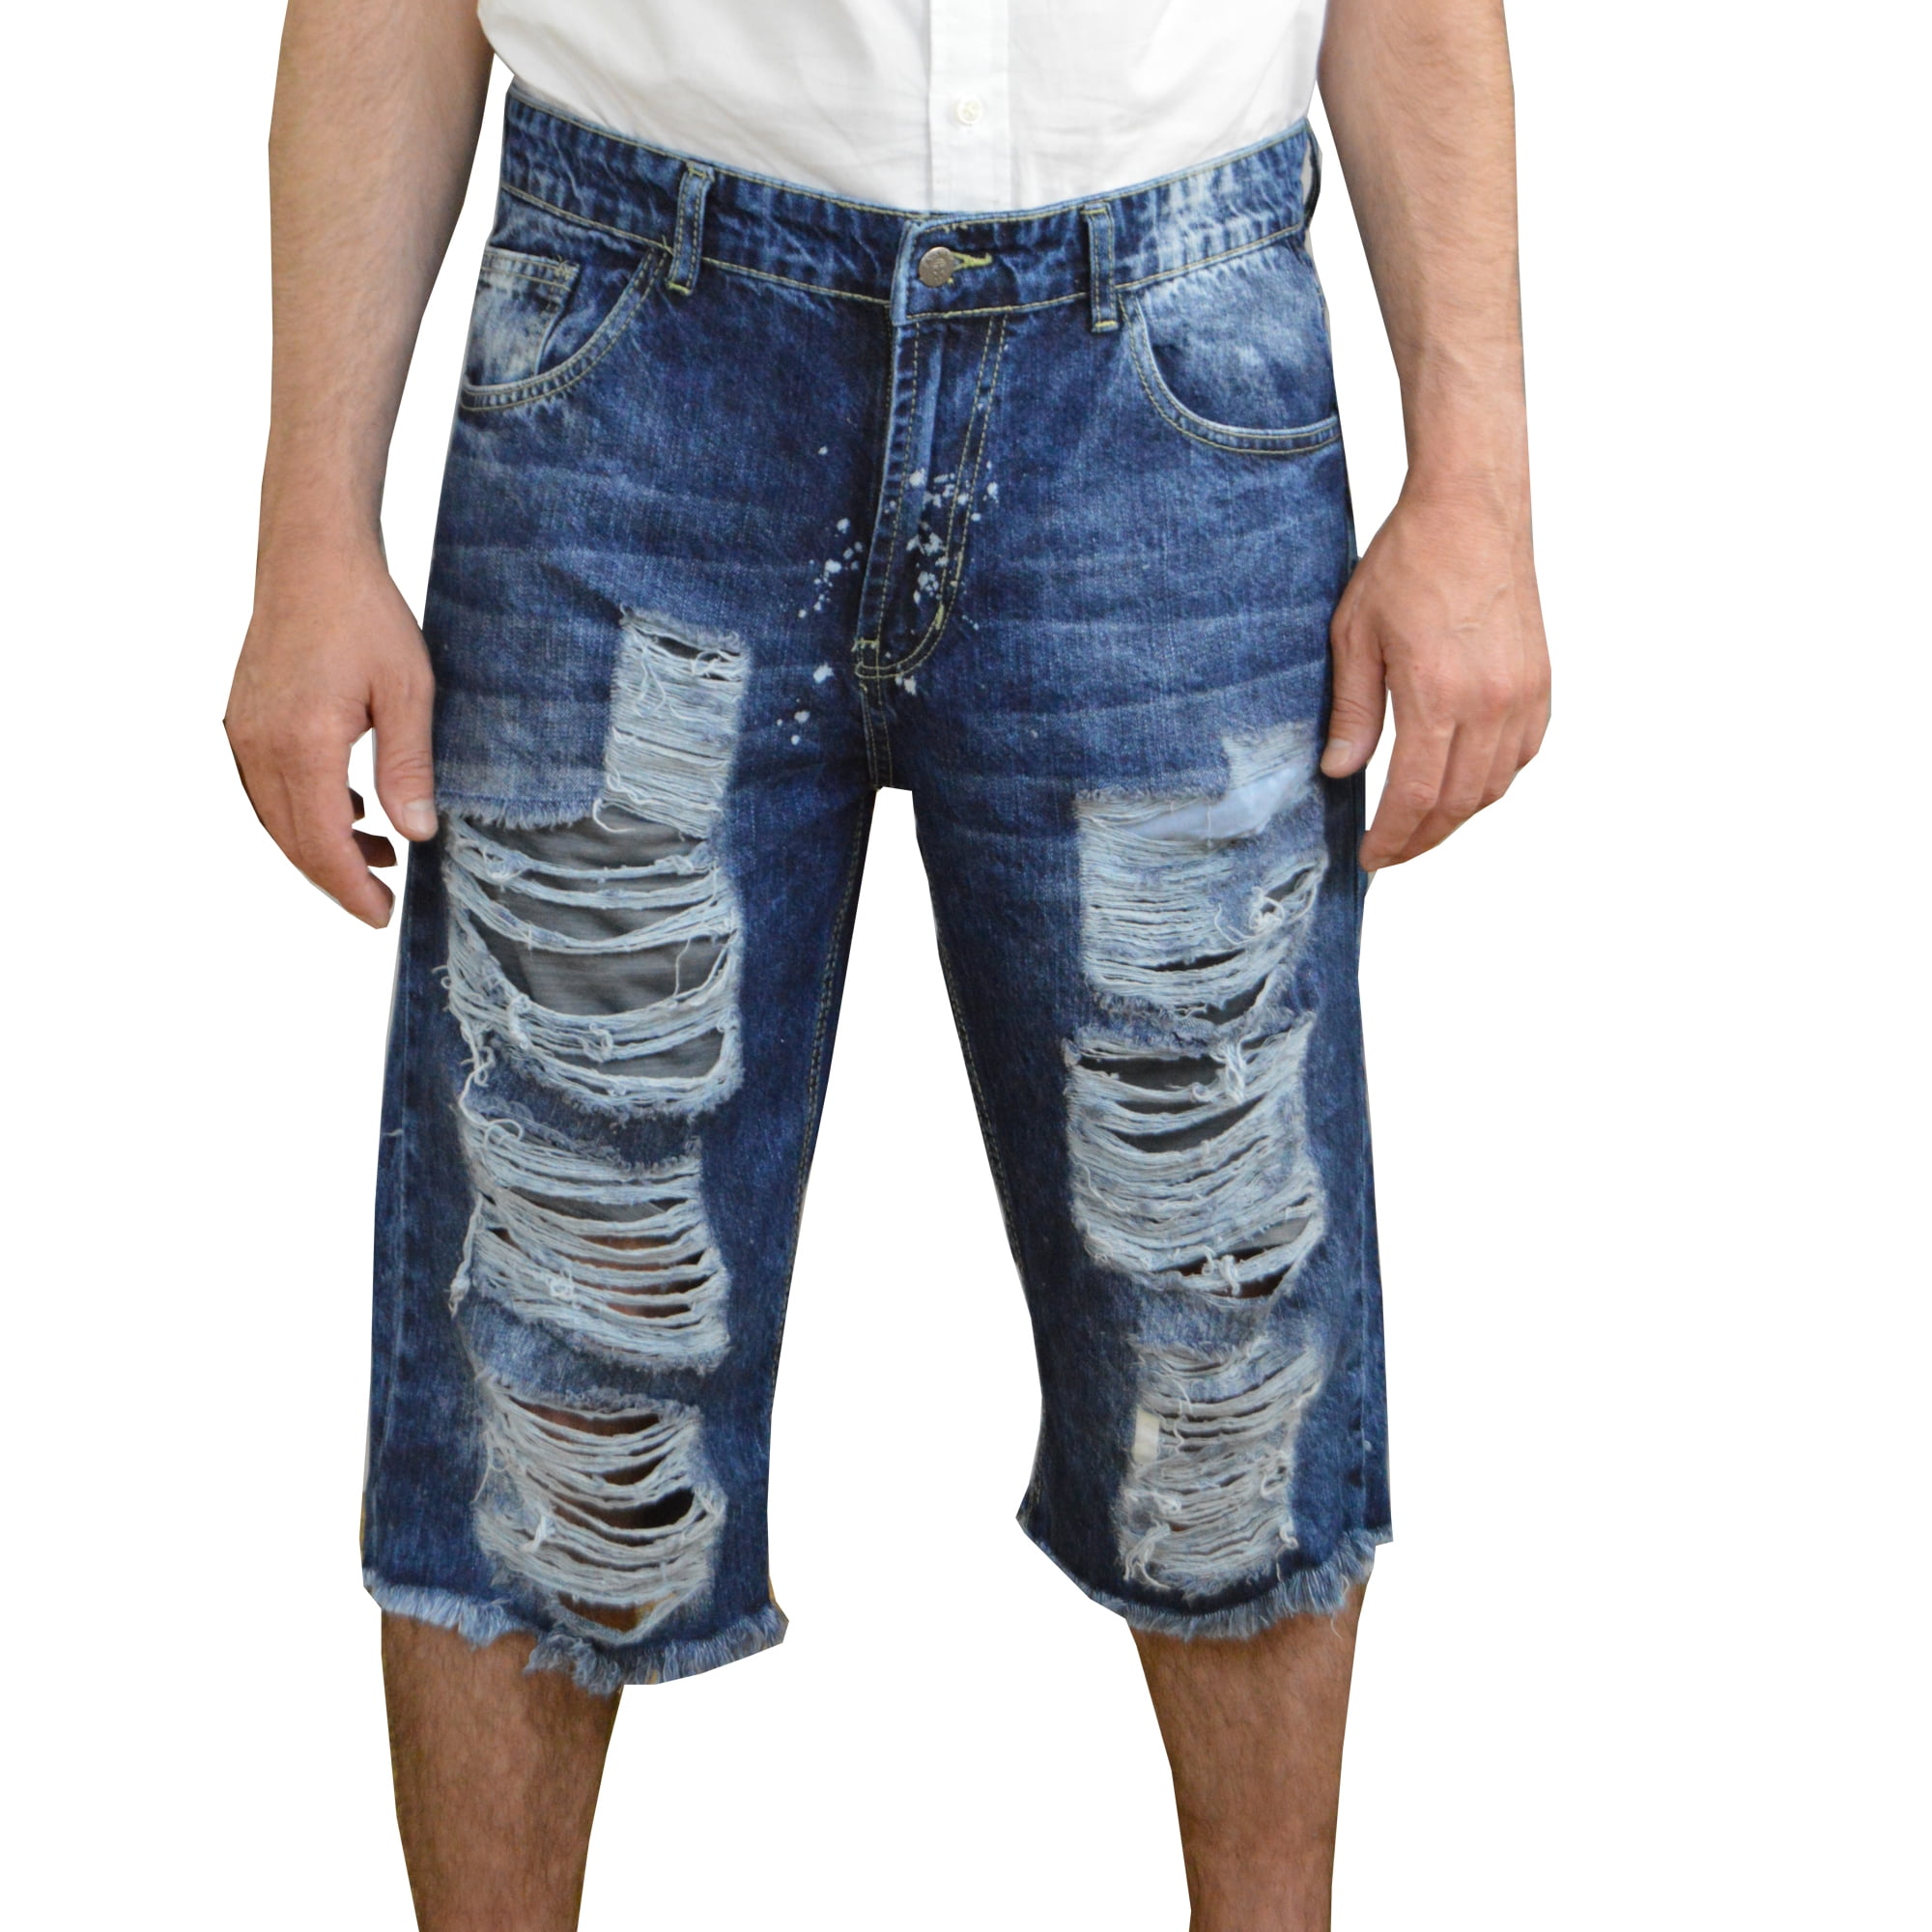 BETORY Cozy Stylish Ripped Jeans Shorts Men's Straight Fit Stretch Button Motocycle Distressed Denim Shorts with Pockets 